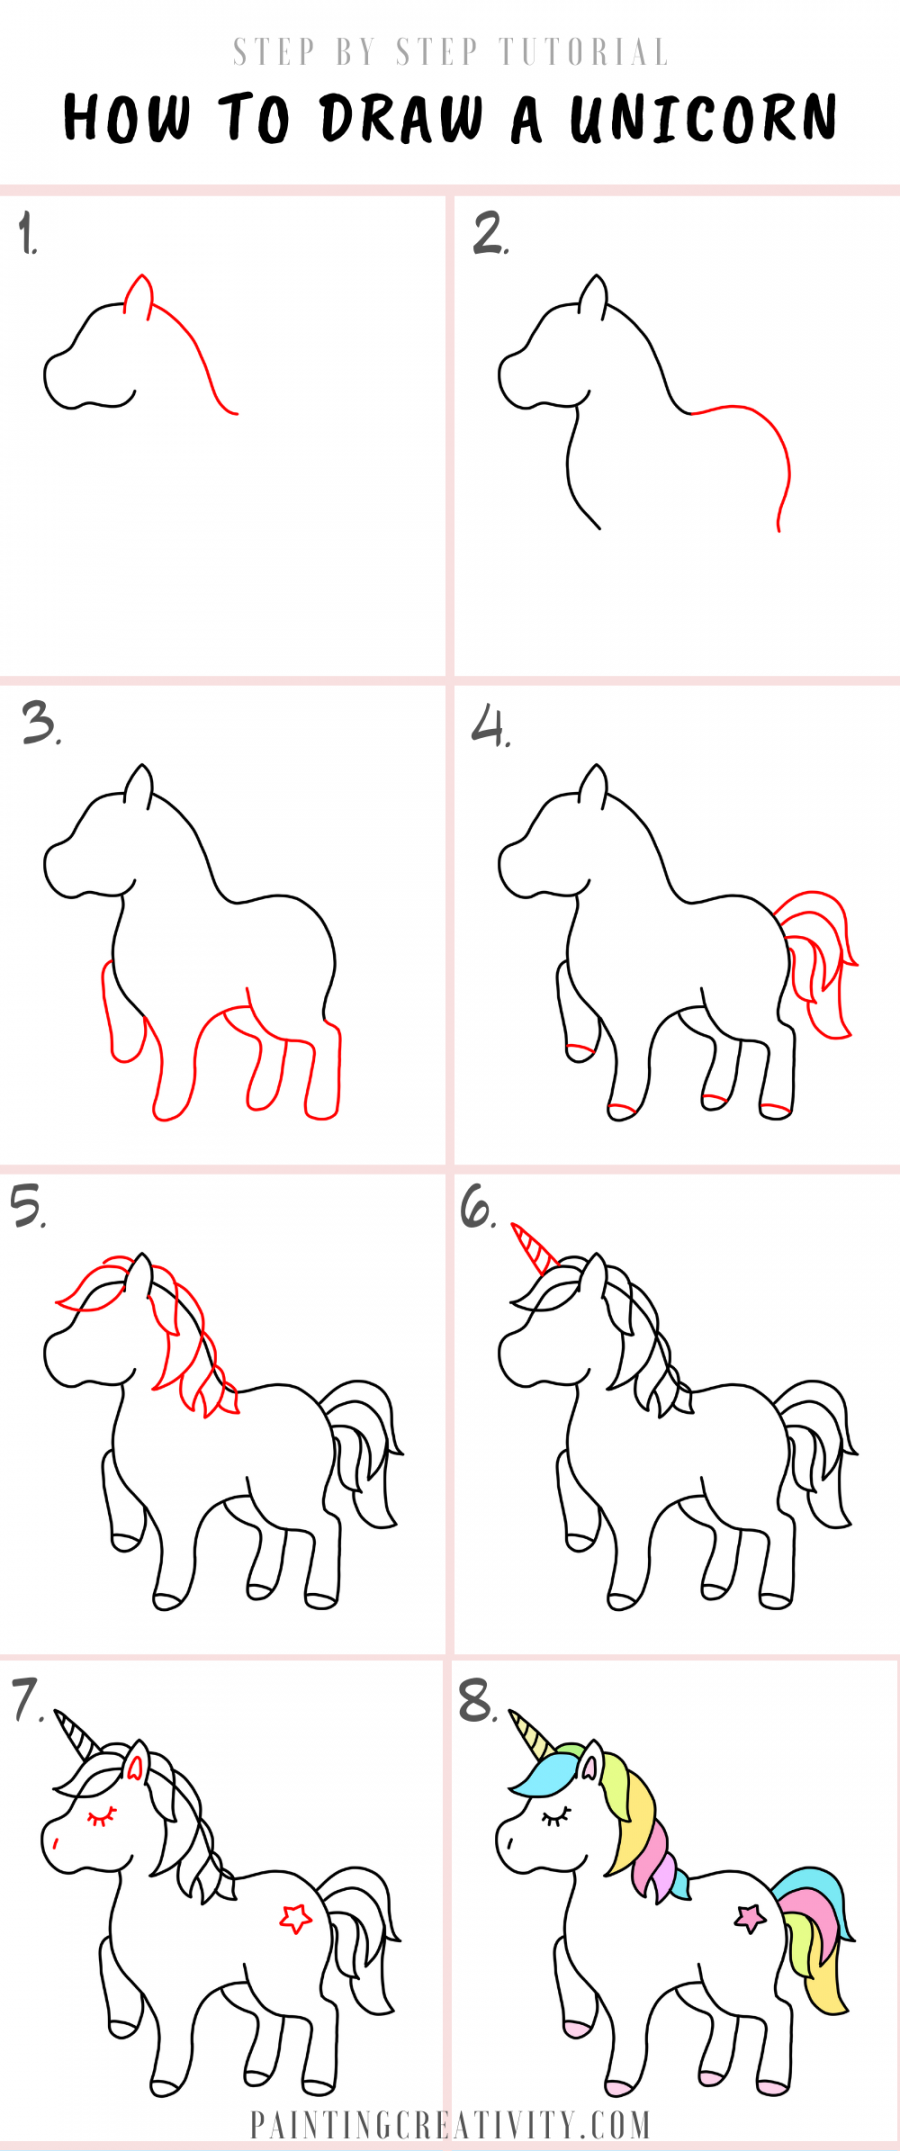 How to draw a Unicorn - Step By Step Tutorial  Unicorn drawing